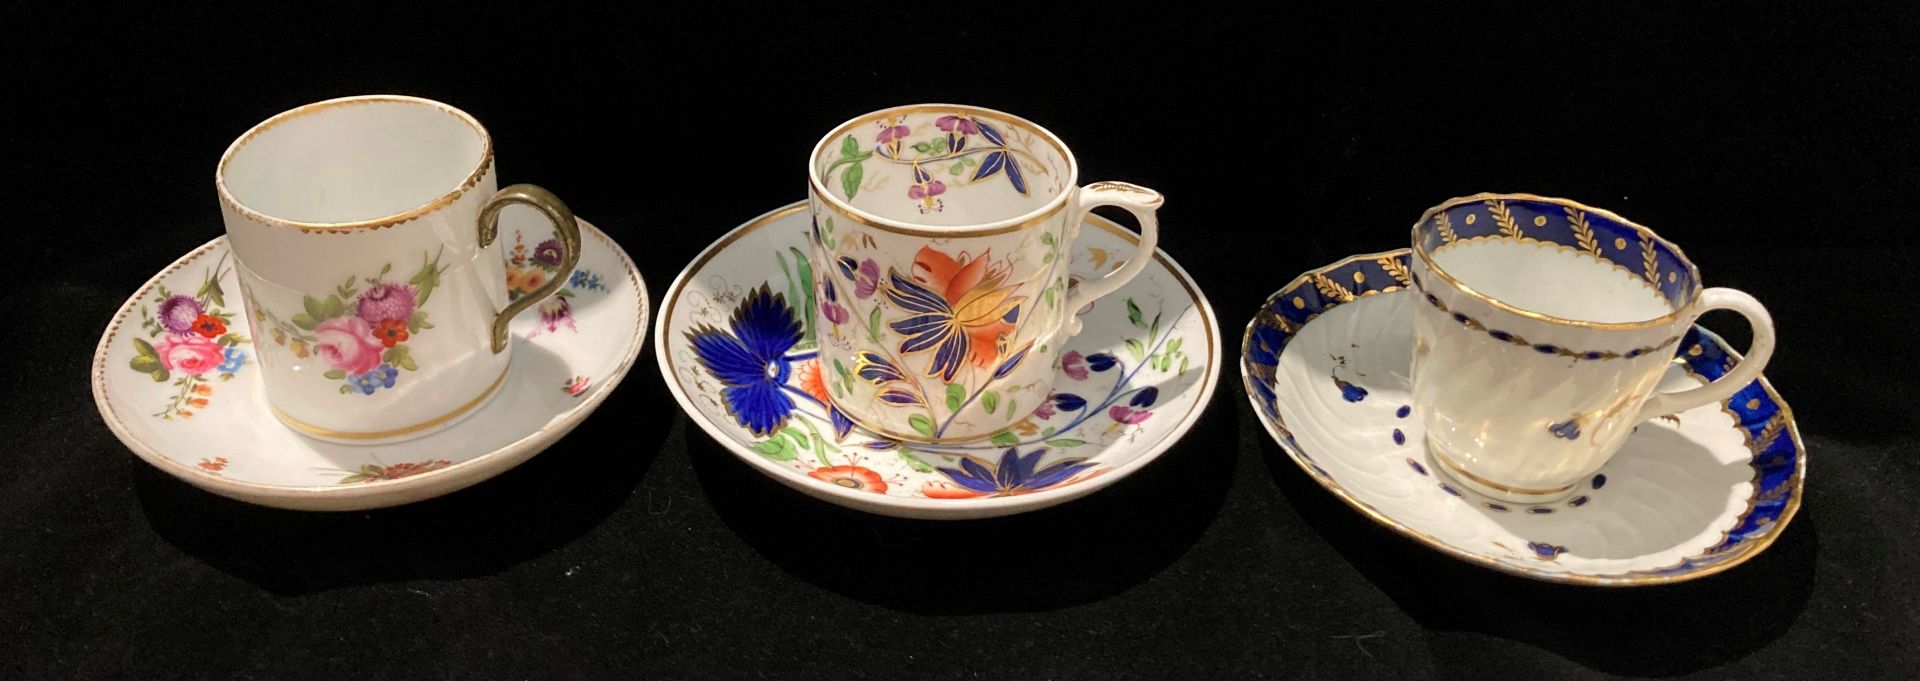 Three patterned cups and saucers